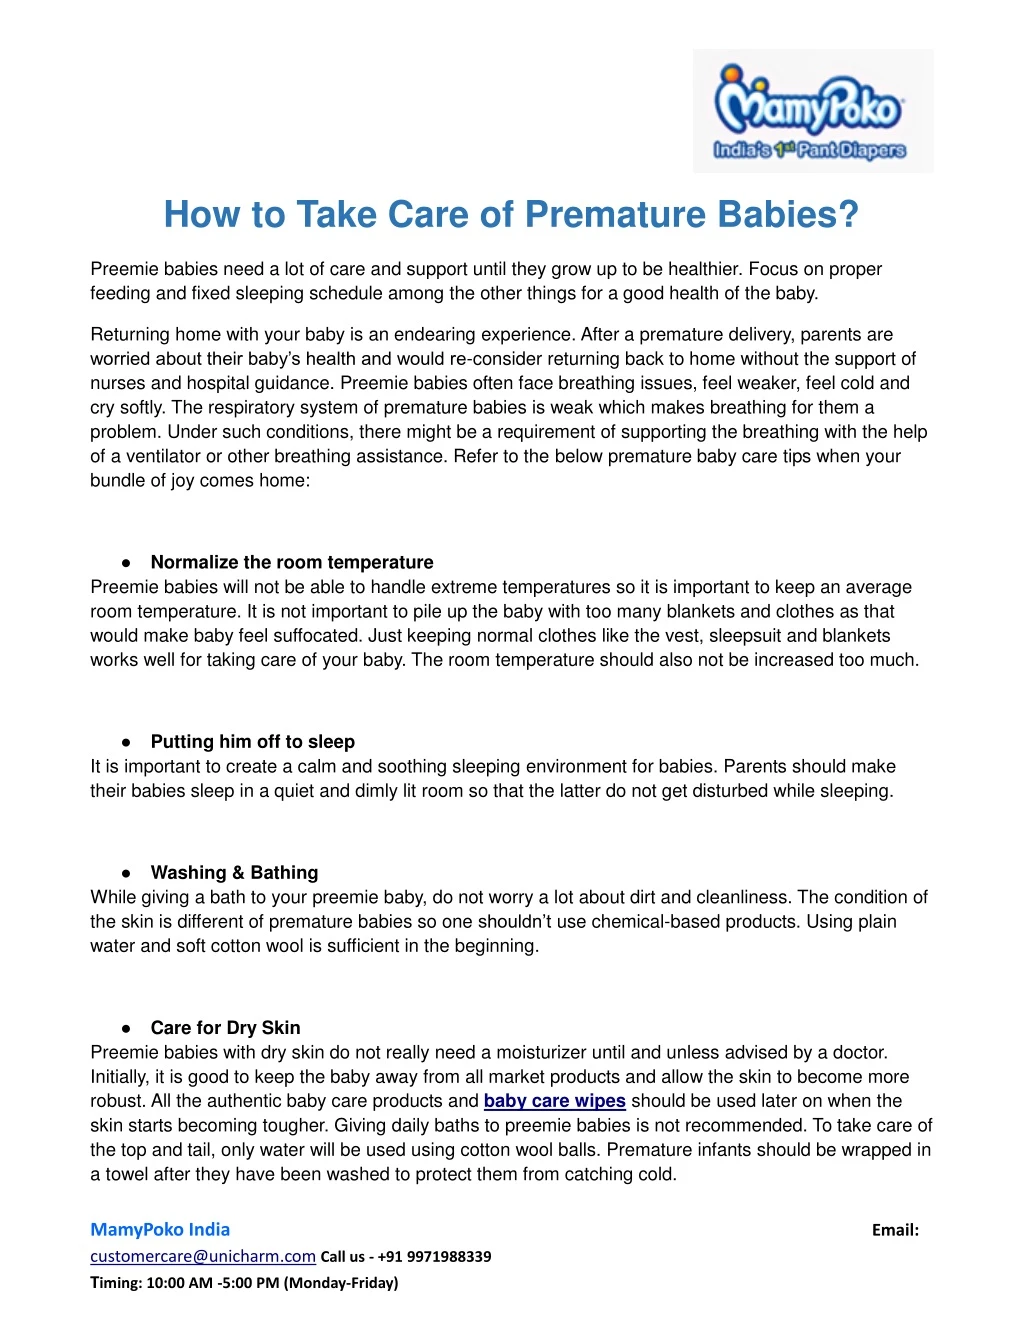 how to take care of premature babies